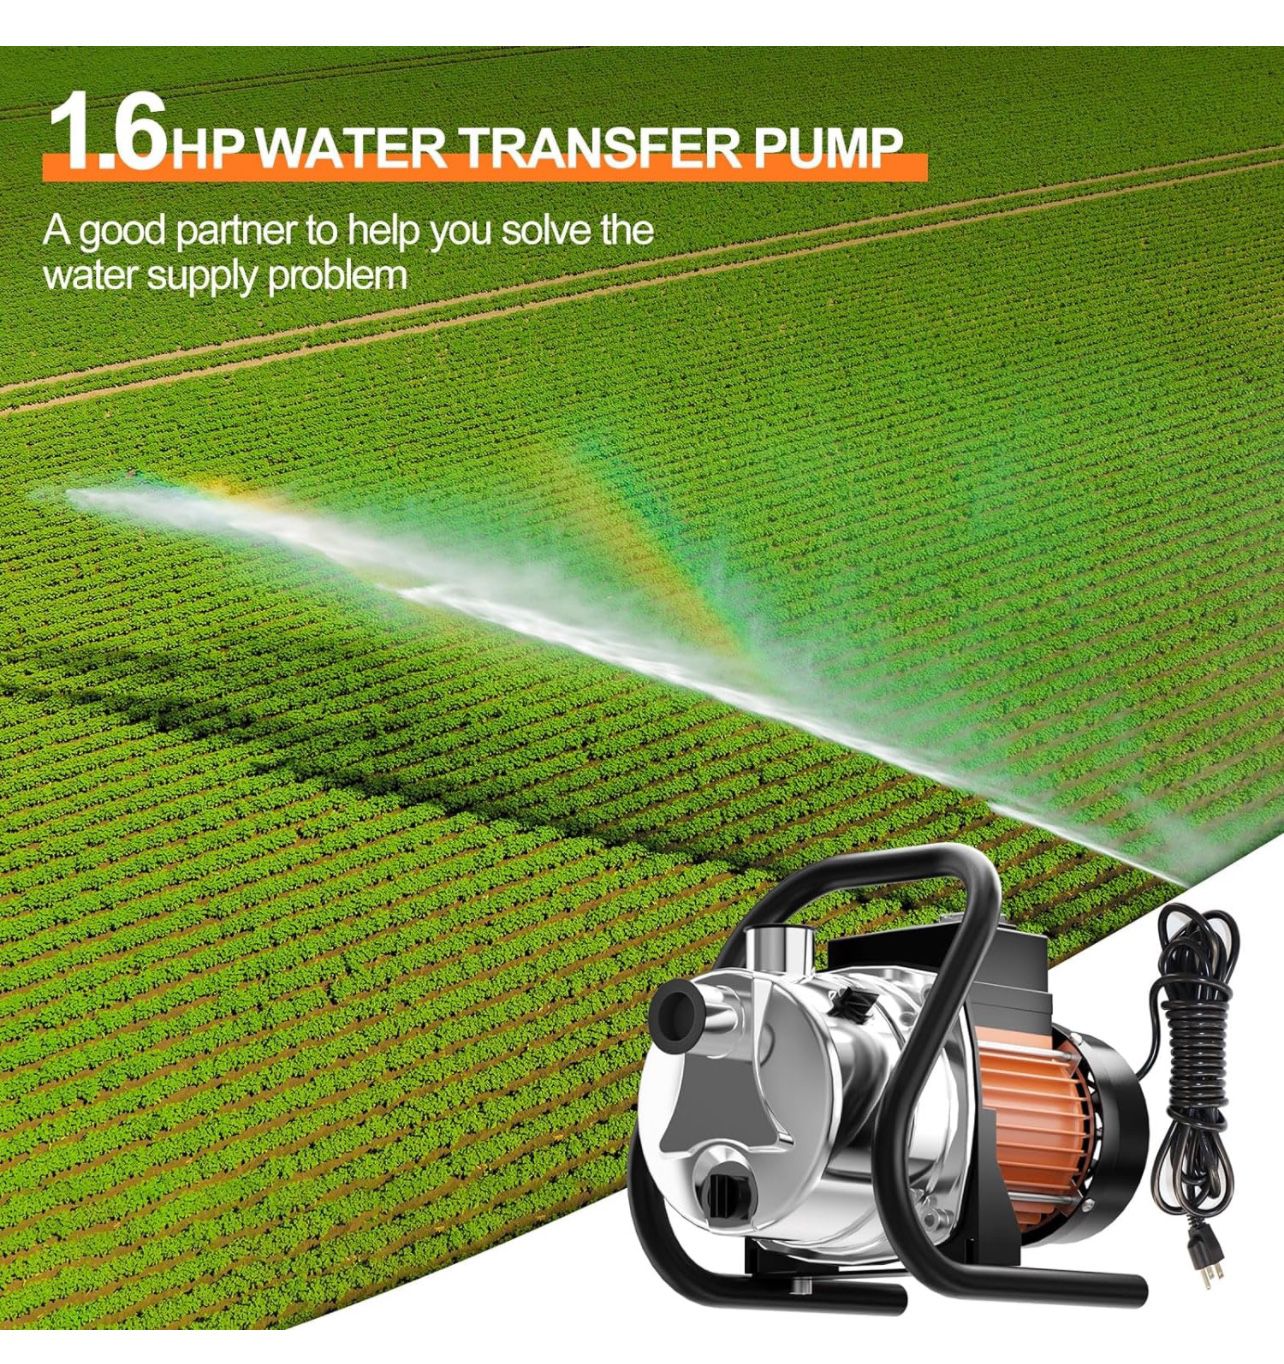 1.6HP Portable Water Transfer Pump 1200GPH Shallow Well Pump Garden Booster Sprinkler Pumps for Irrigation Lawn Farm Water Removal